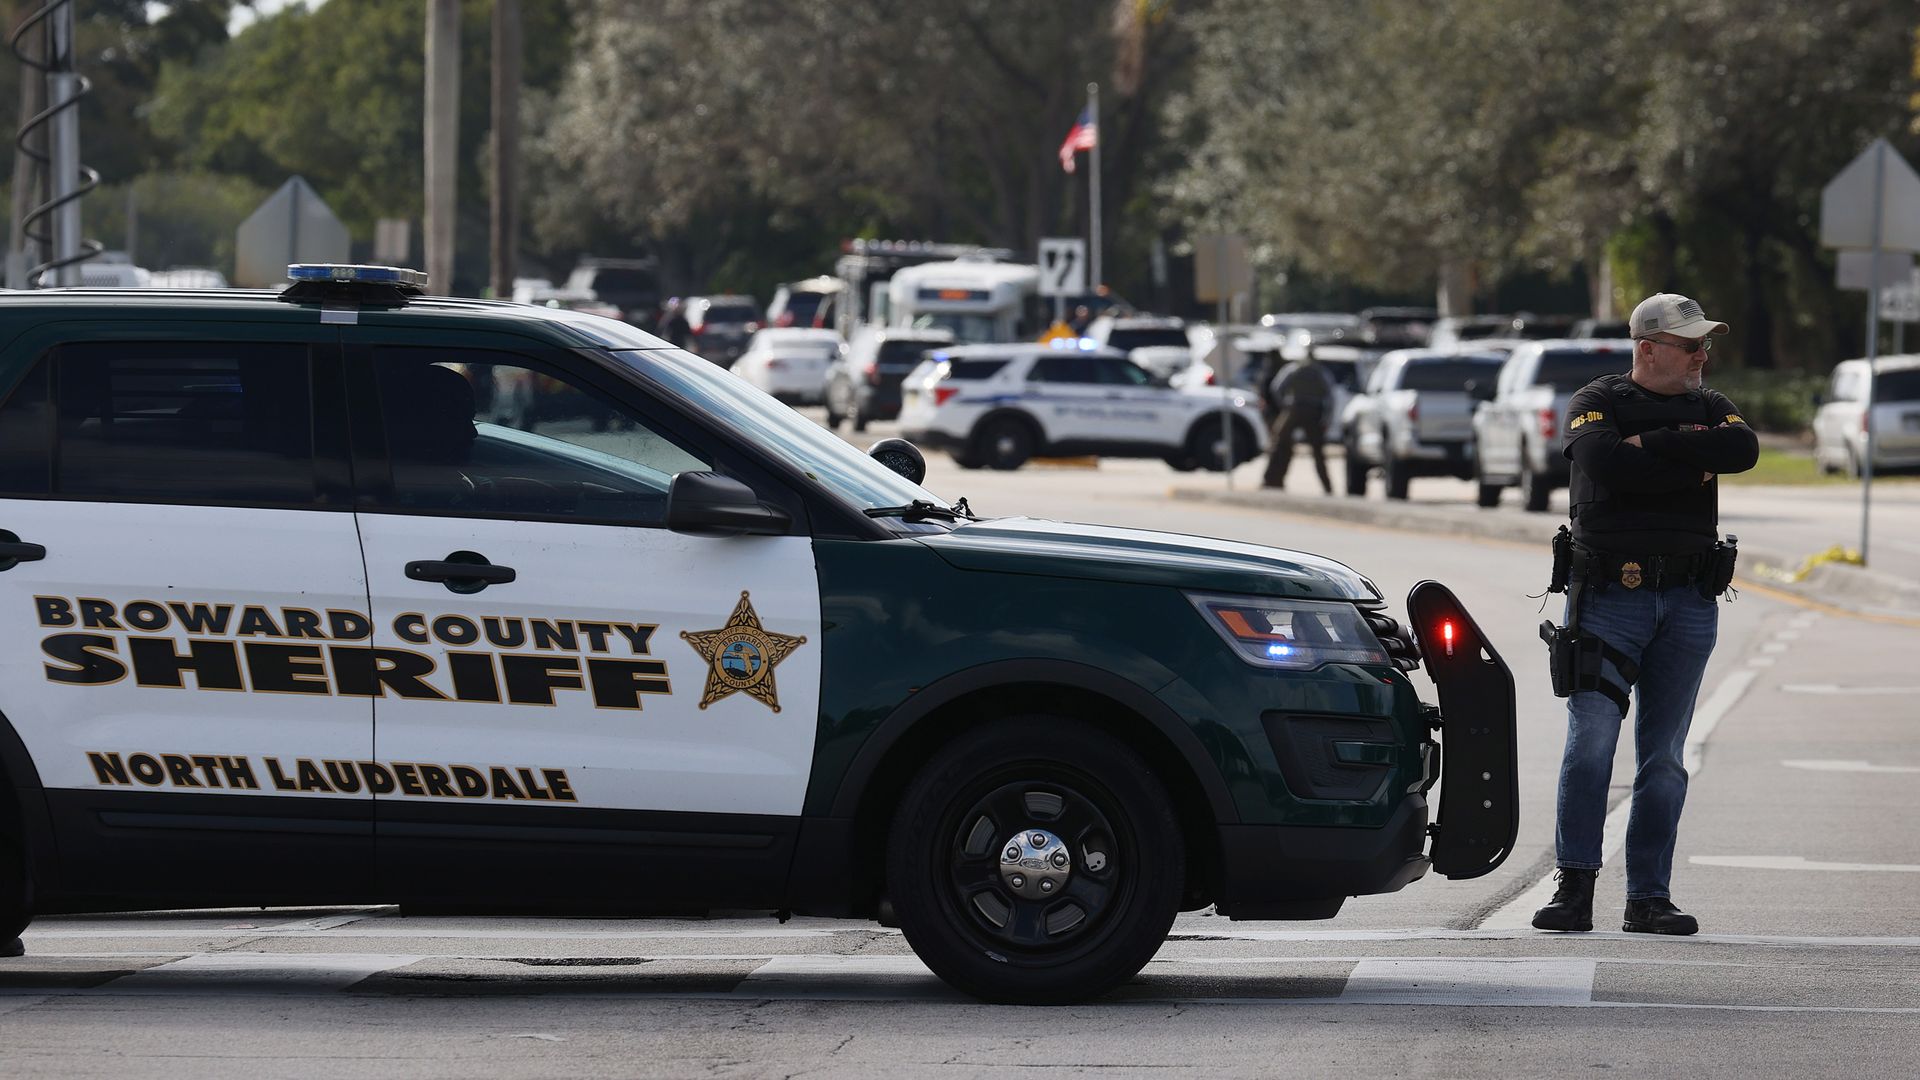 Law enforcement blocking the area where the shooting occurred. Photo: Joe Raedle/Getty Images